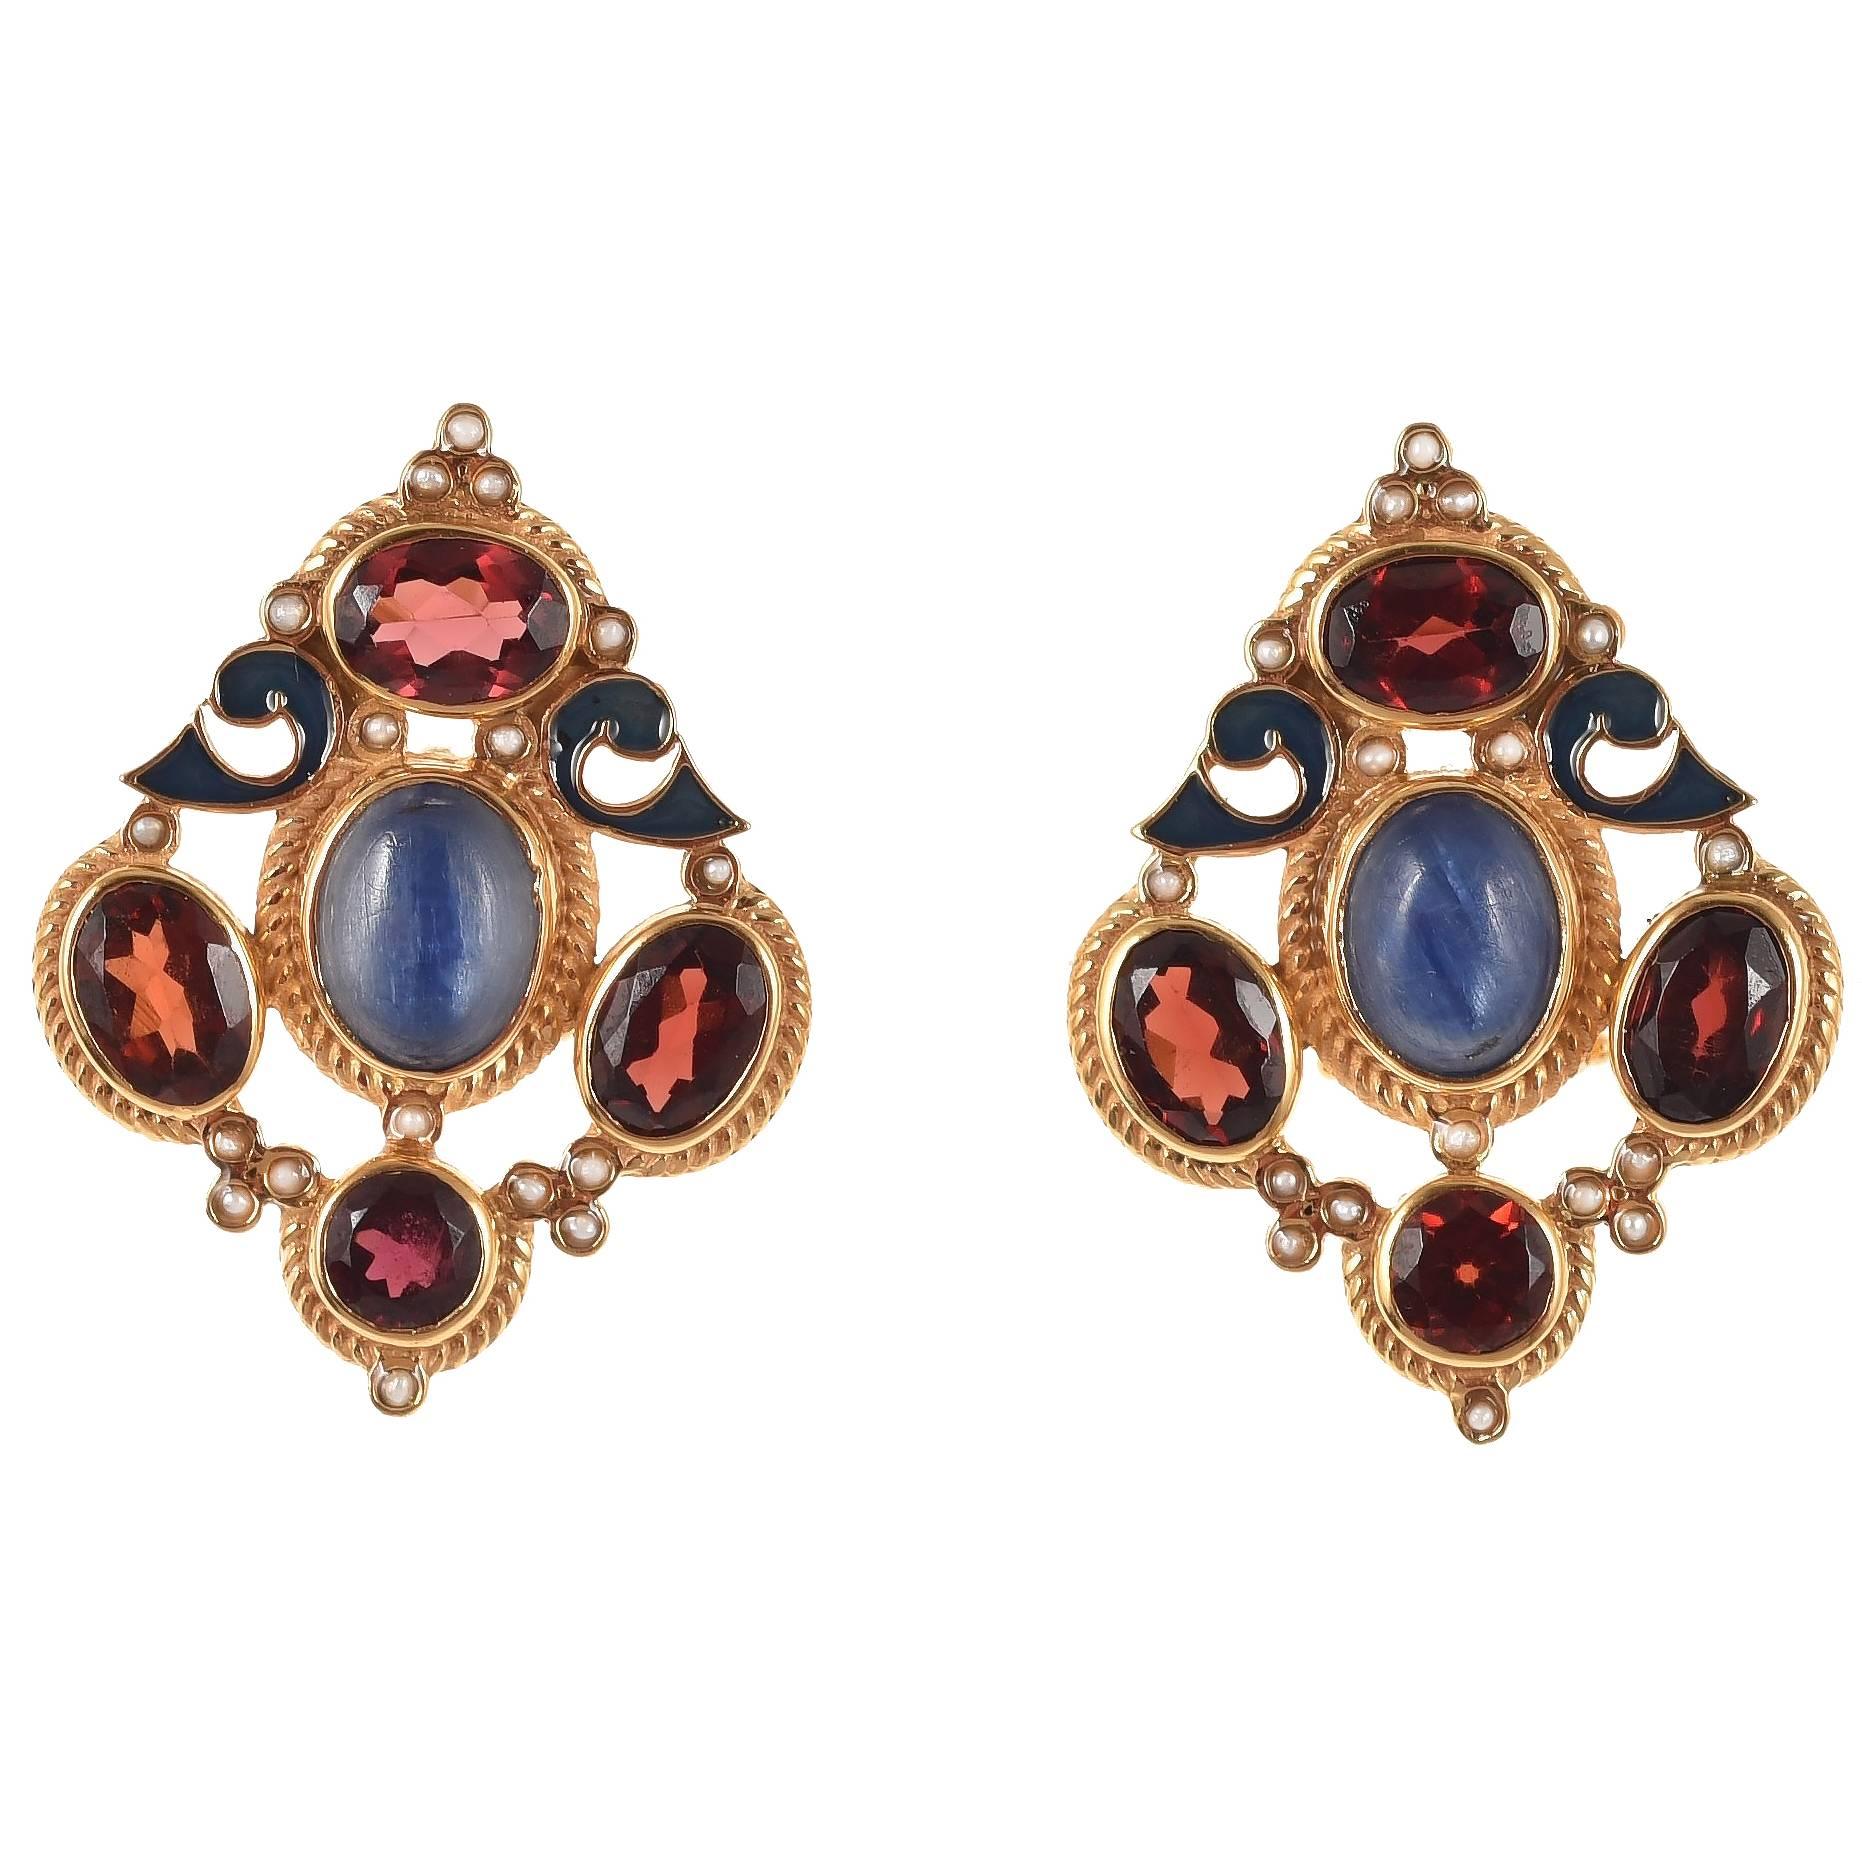 Pair of Earrings with Garnet and Kyanite by Diego Percossi Papi For Sale